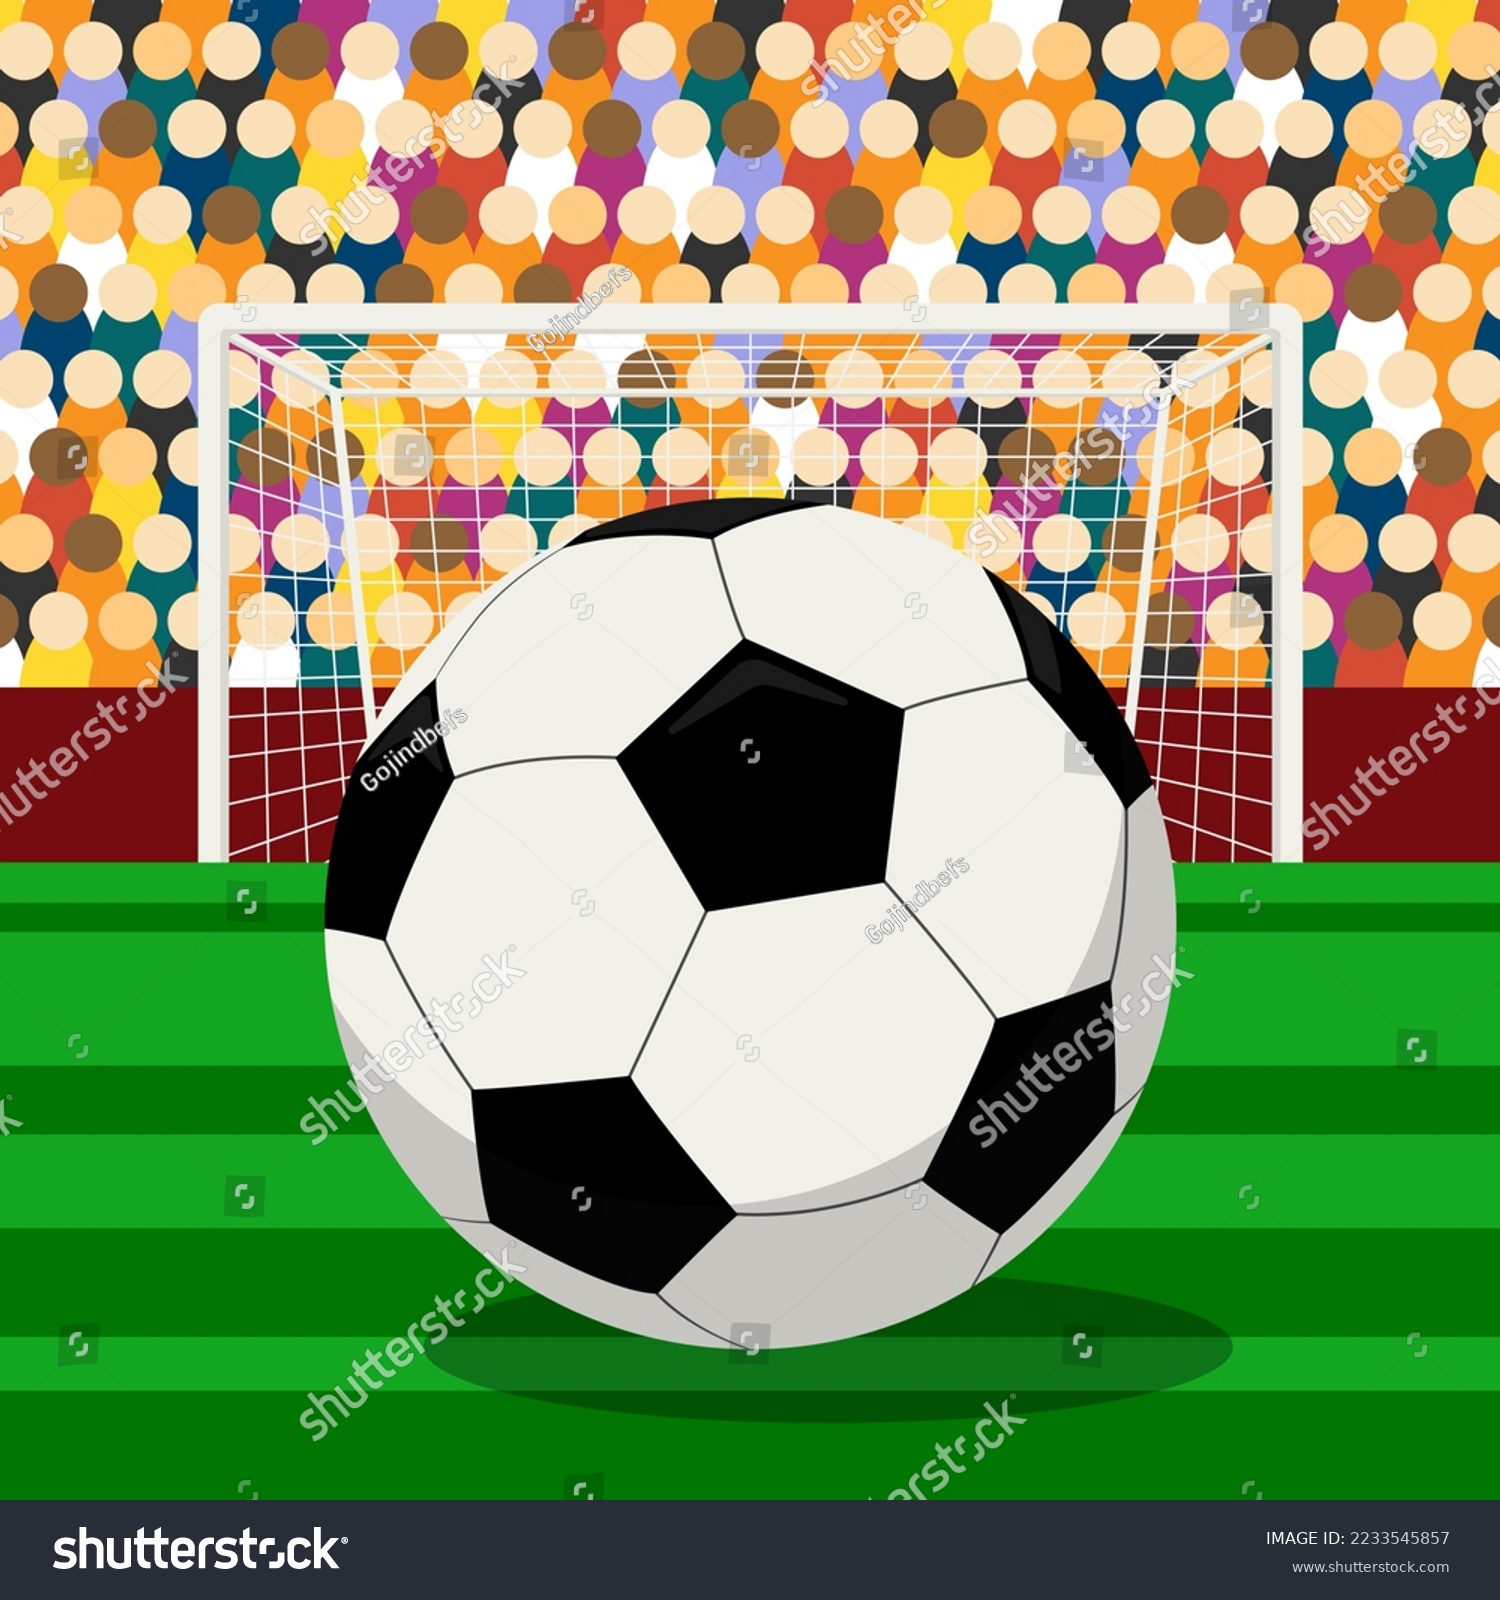 Vector illustration of a soccer ball on the background of a soccer field, goal posts and spectators. Flat design background. #2233545857